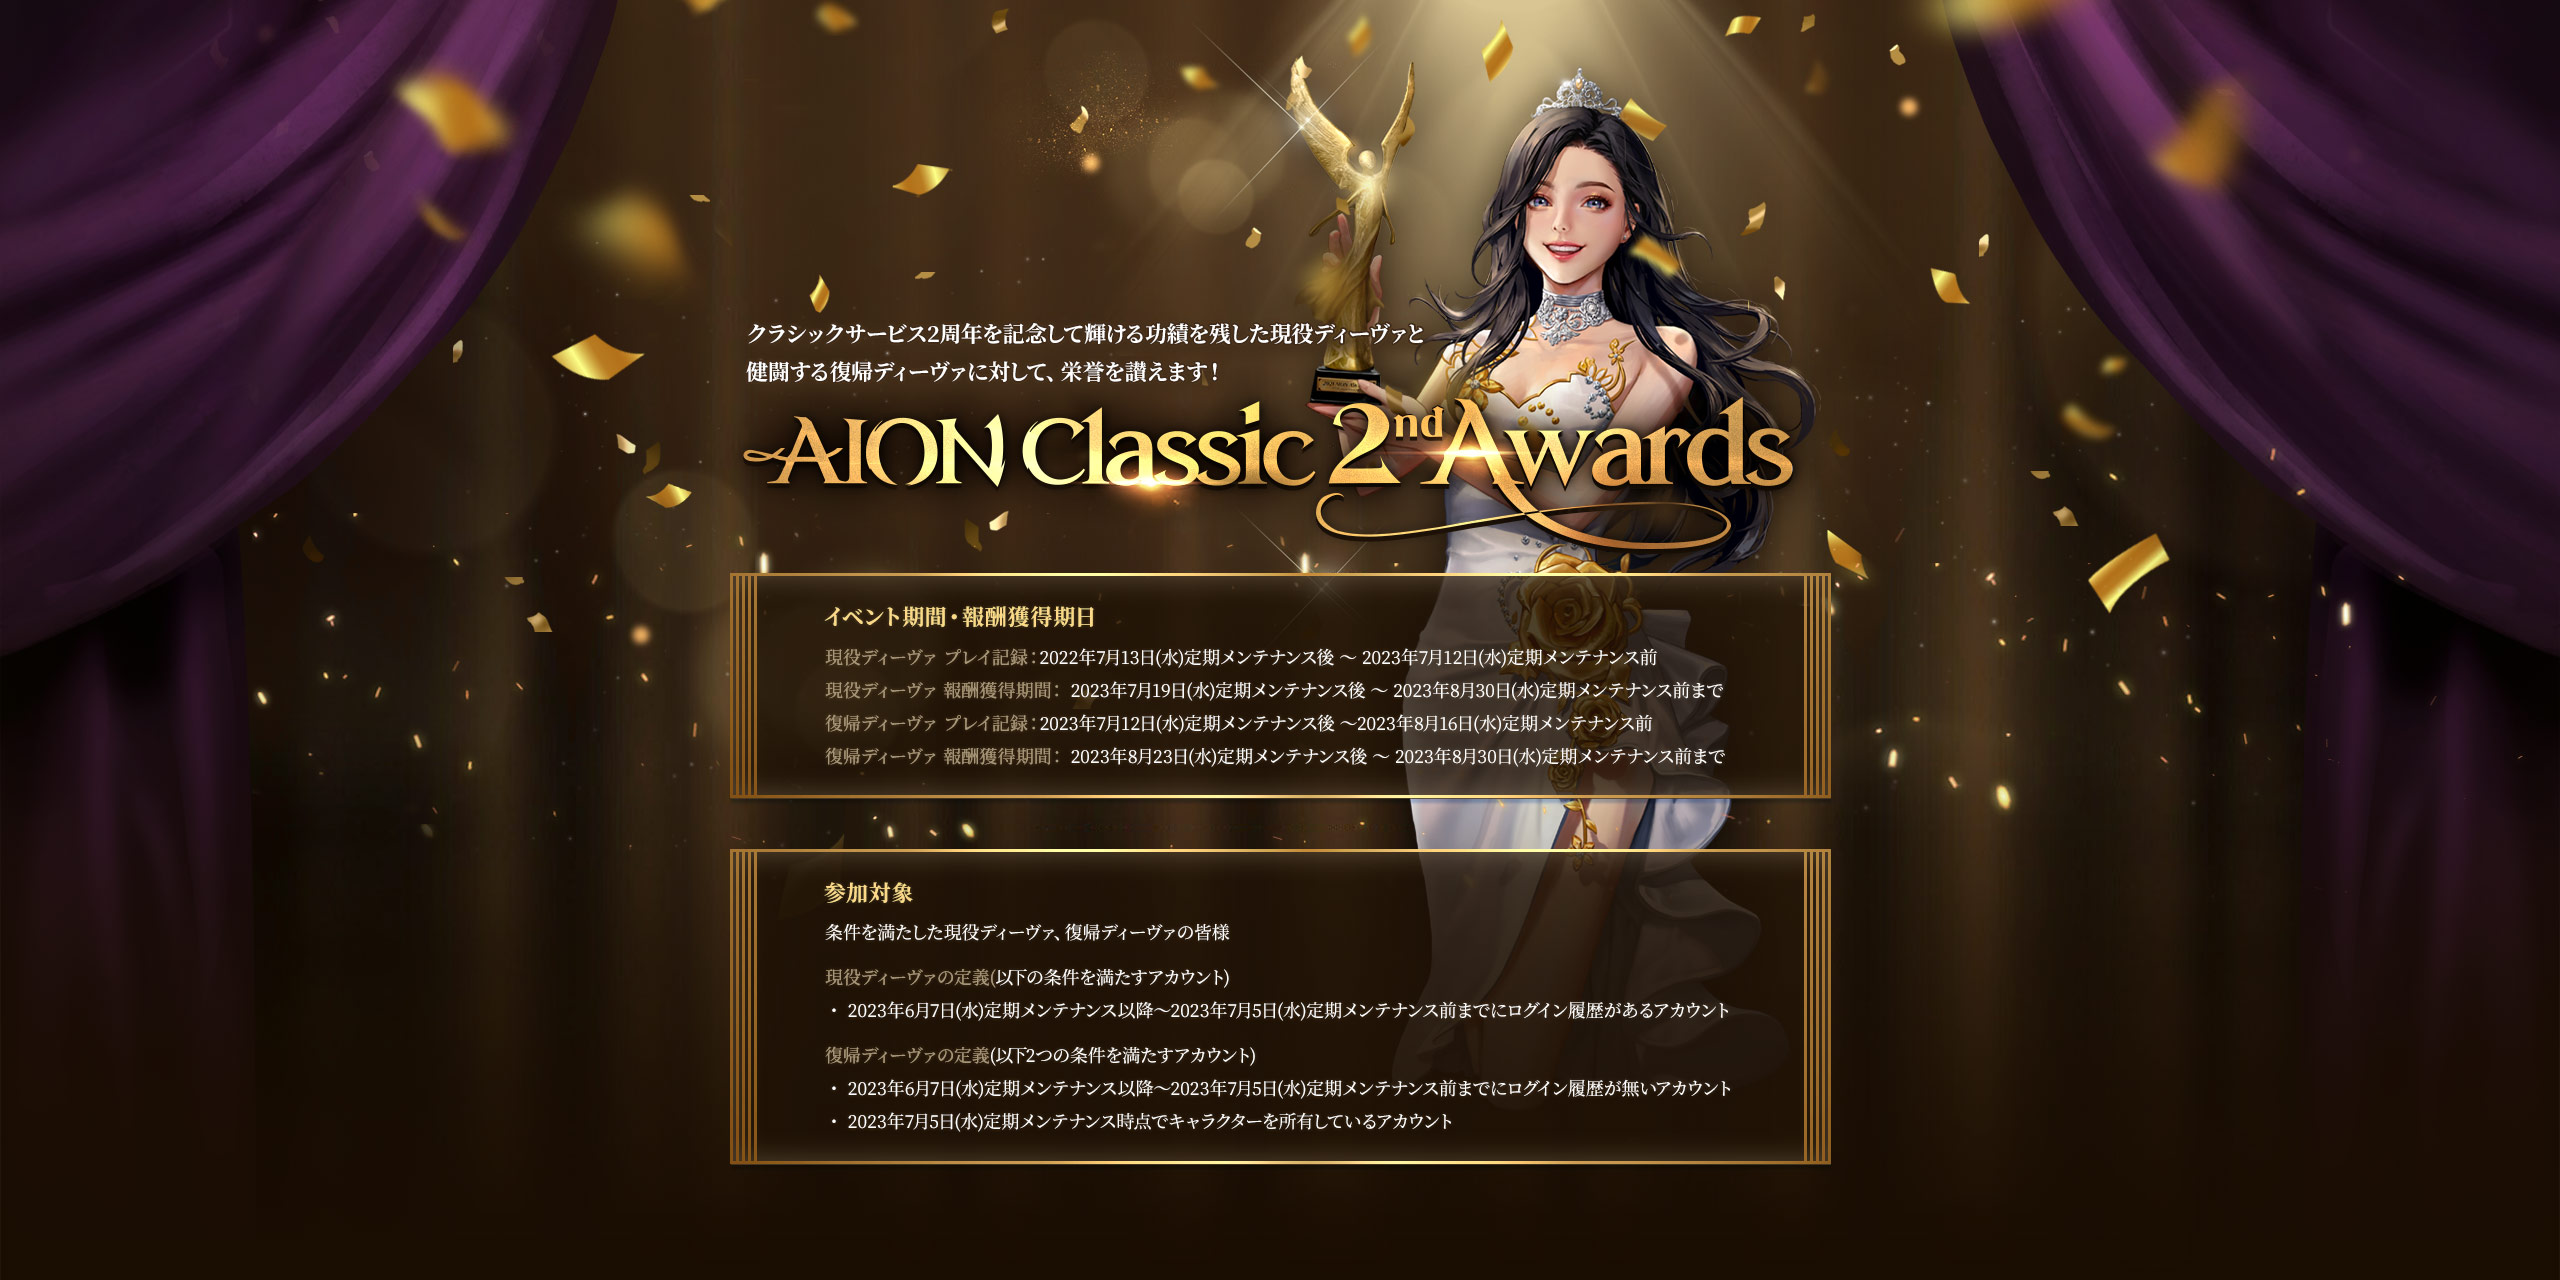 AION Classic 2nd Awards